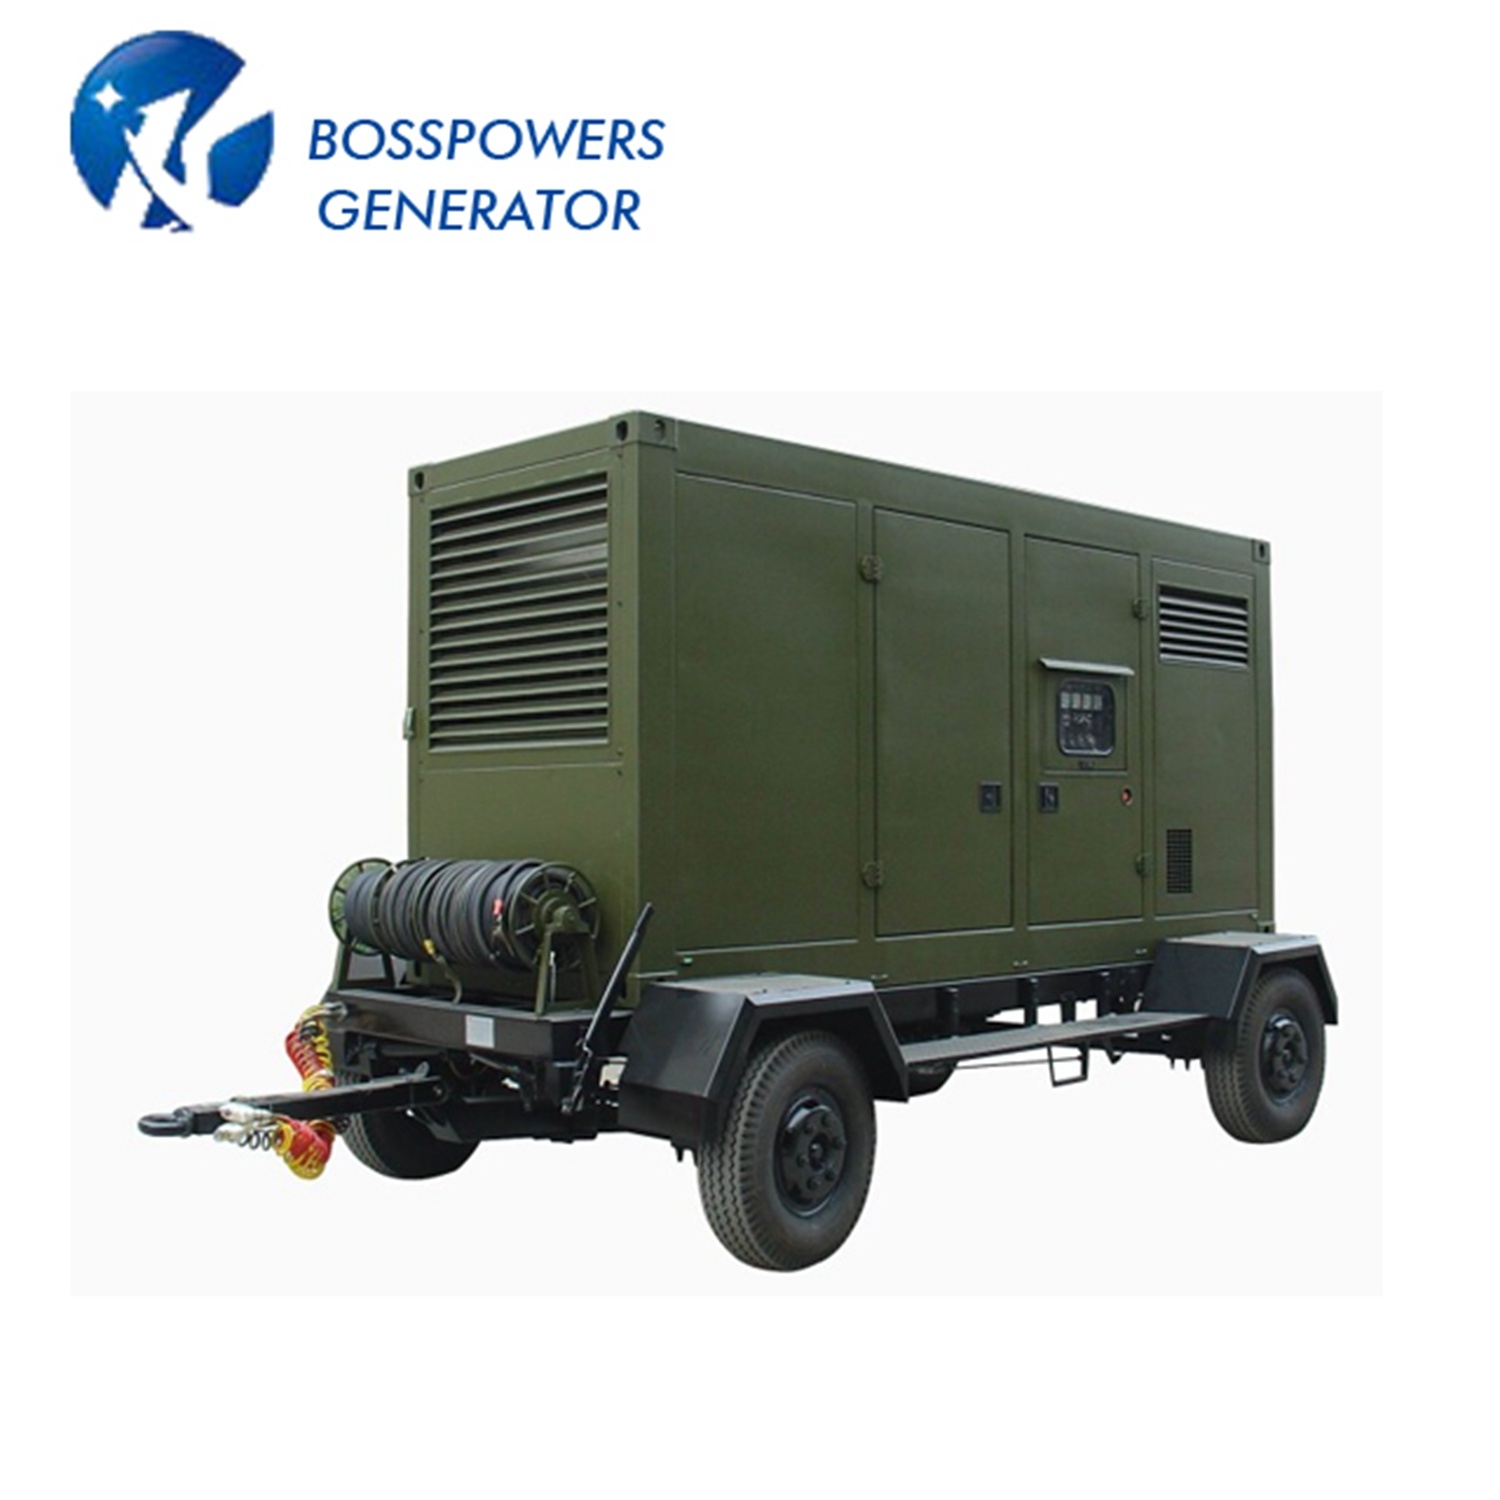 50kw Heavy-Duty Trailer Mounted Mobile Diesel Generator with Fawde Engine